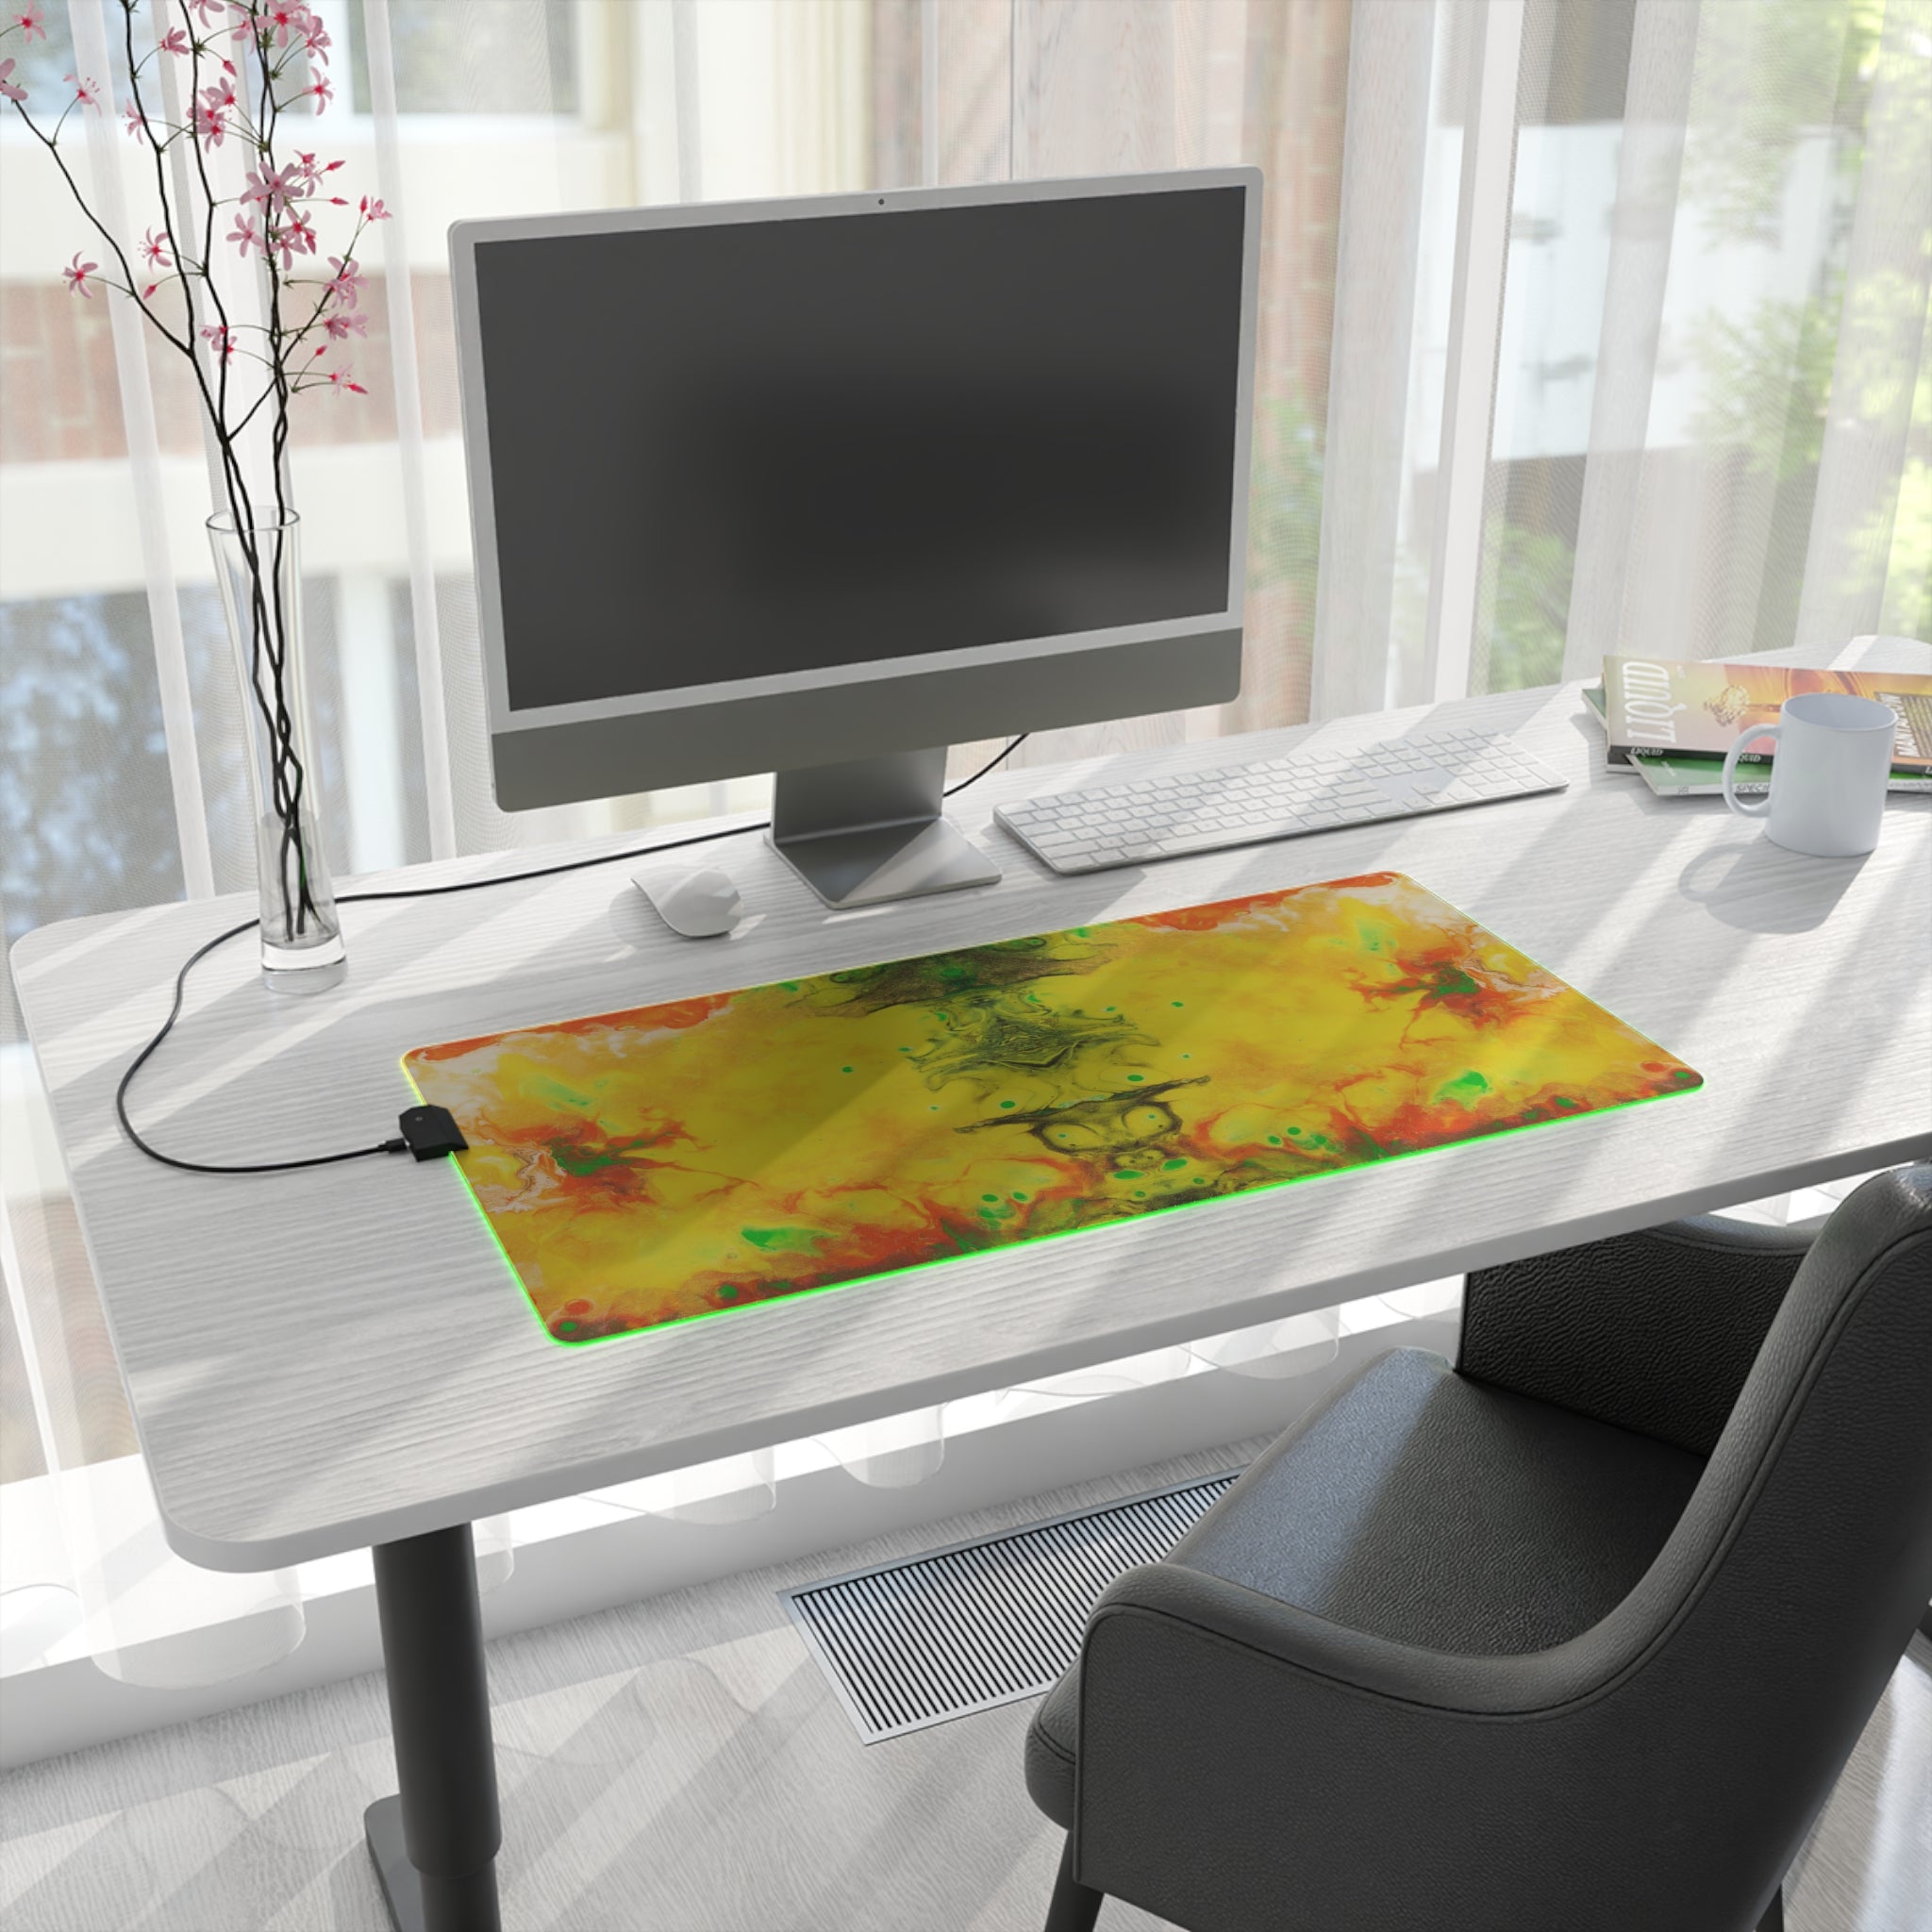 Bloom Of Fire - LED Gaming Mouse Pad